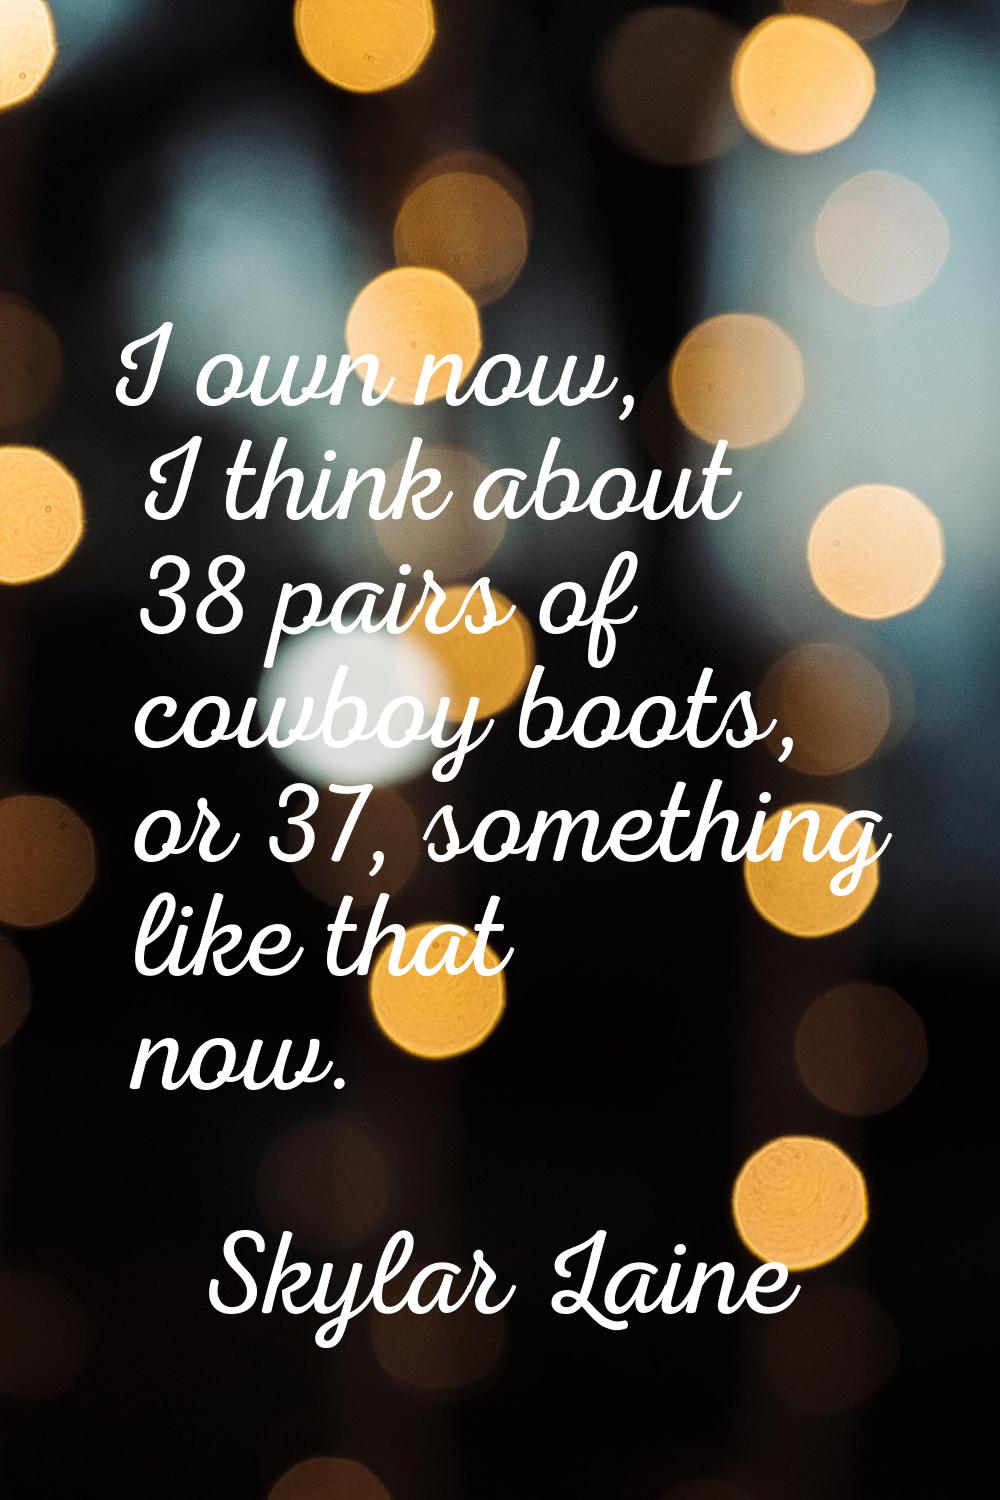 I own now, I think about 38 pairs of cowboy boots, or 37, something like that now.